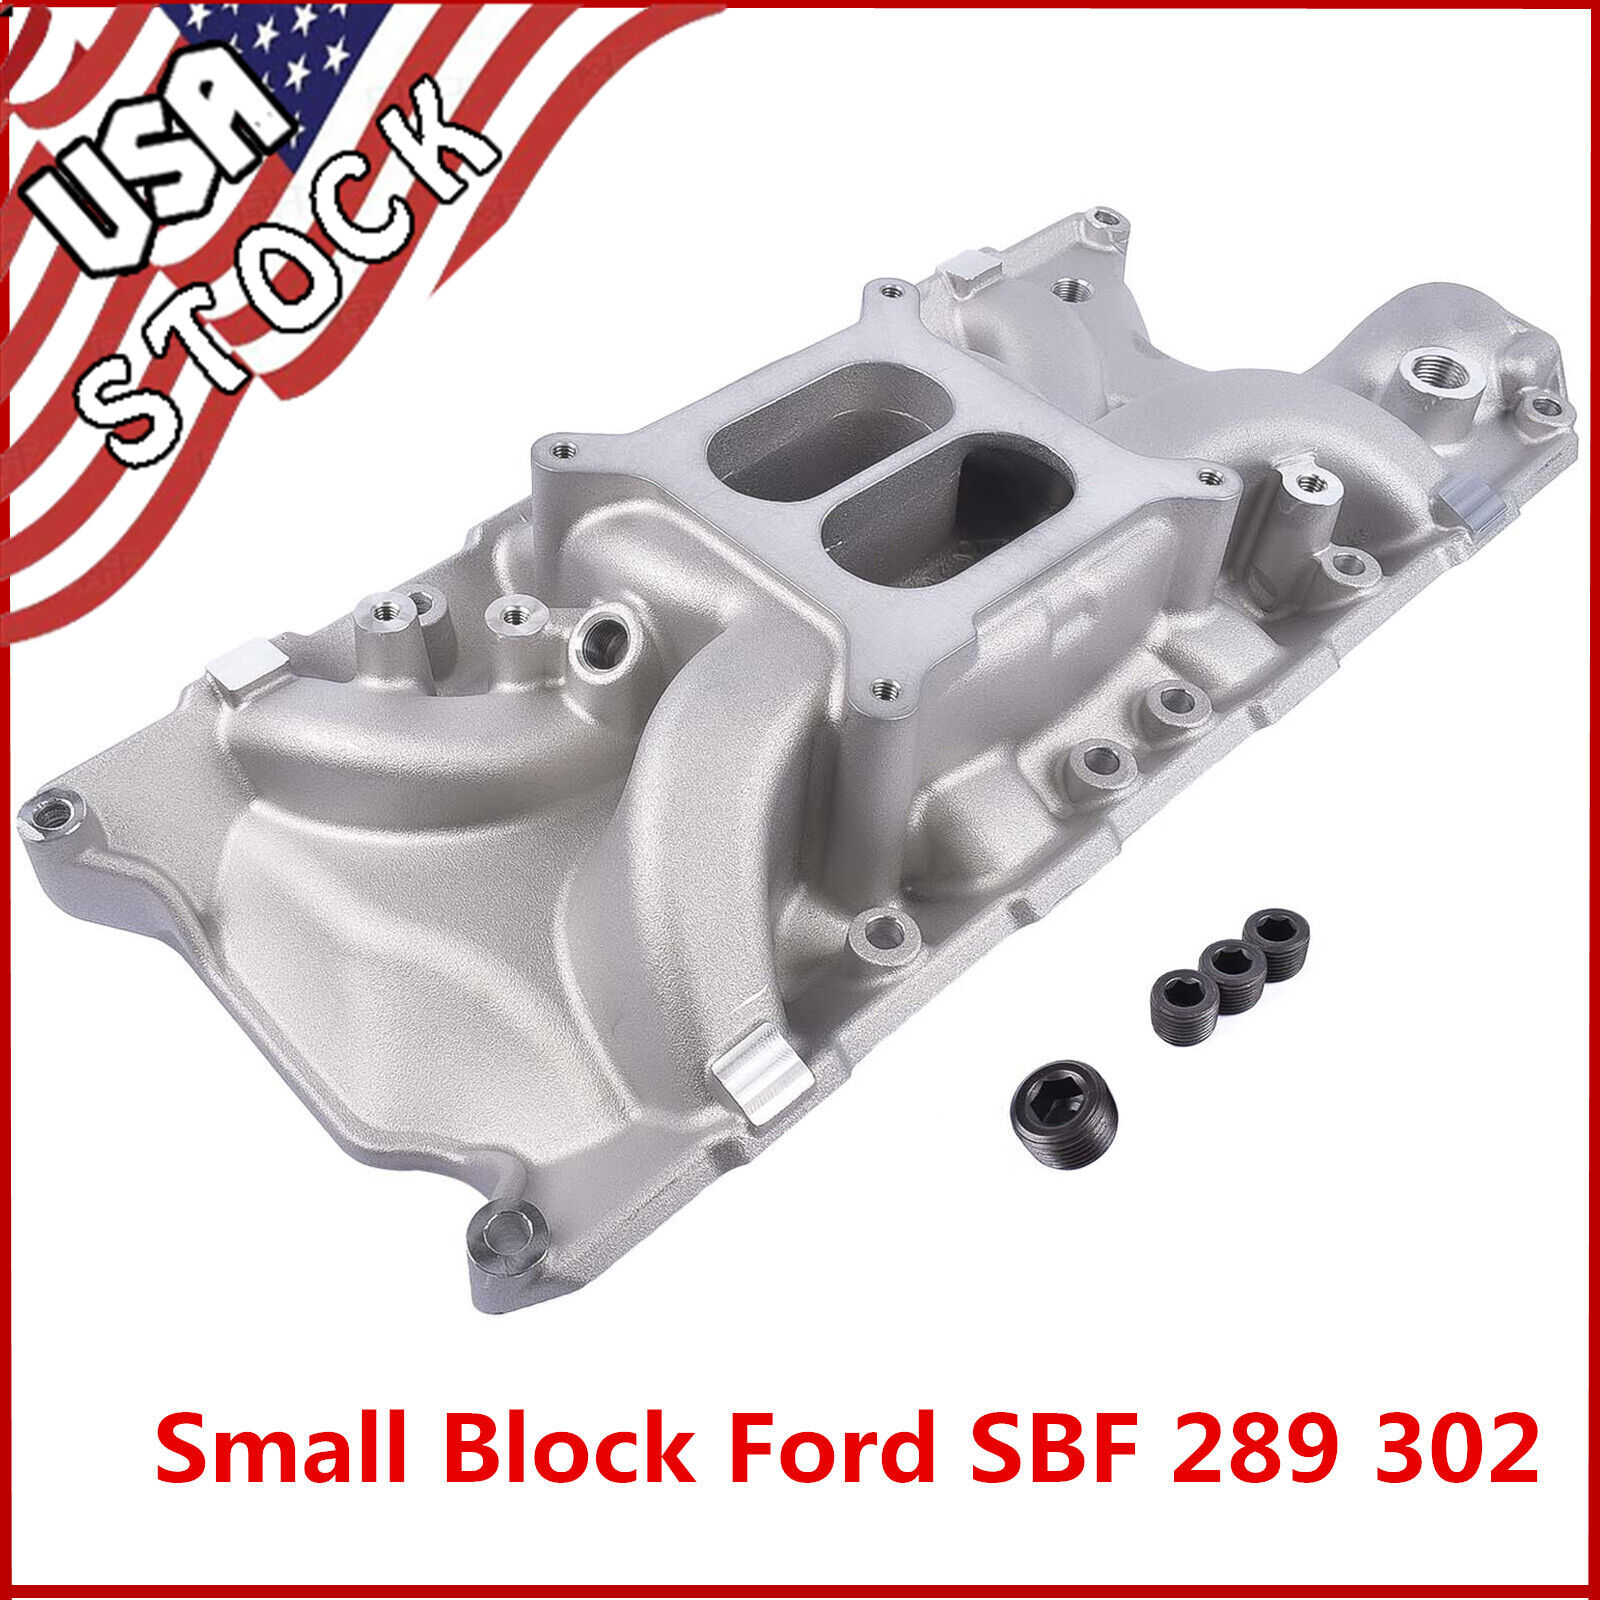 Intake Manifold For Ford Small Block Windsor SBF V8 289 302 Dual Plane